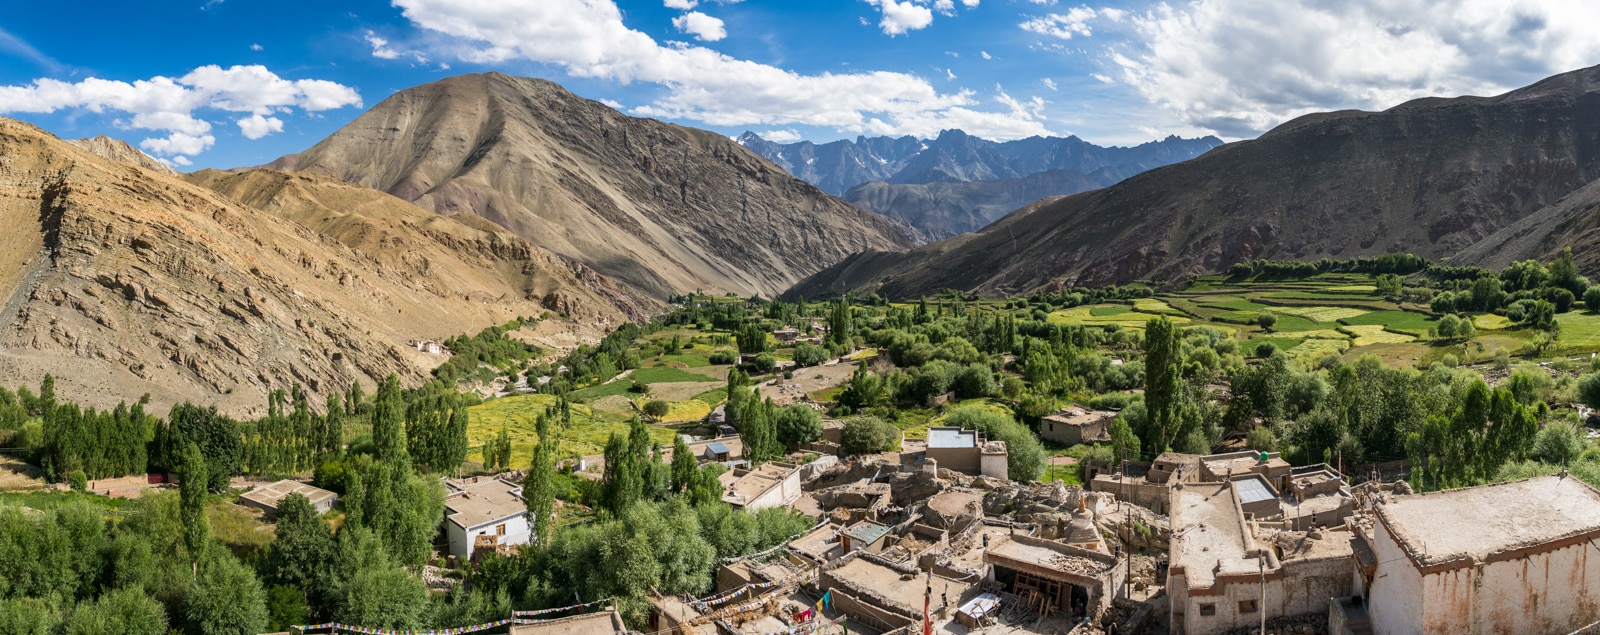 Why we fell in love with India - A green village in the Sham Valley of Ladakh, Jammu and Kashmir state, India - Lost With Purpose travel blog